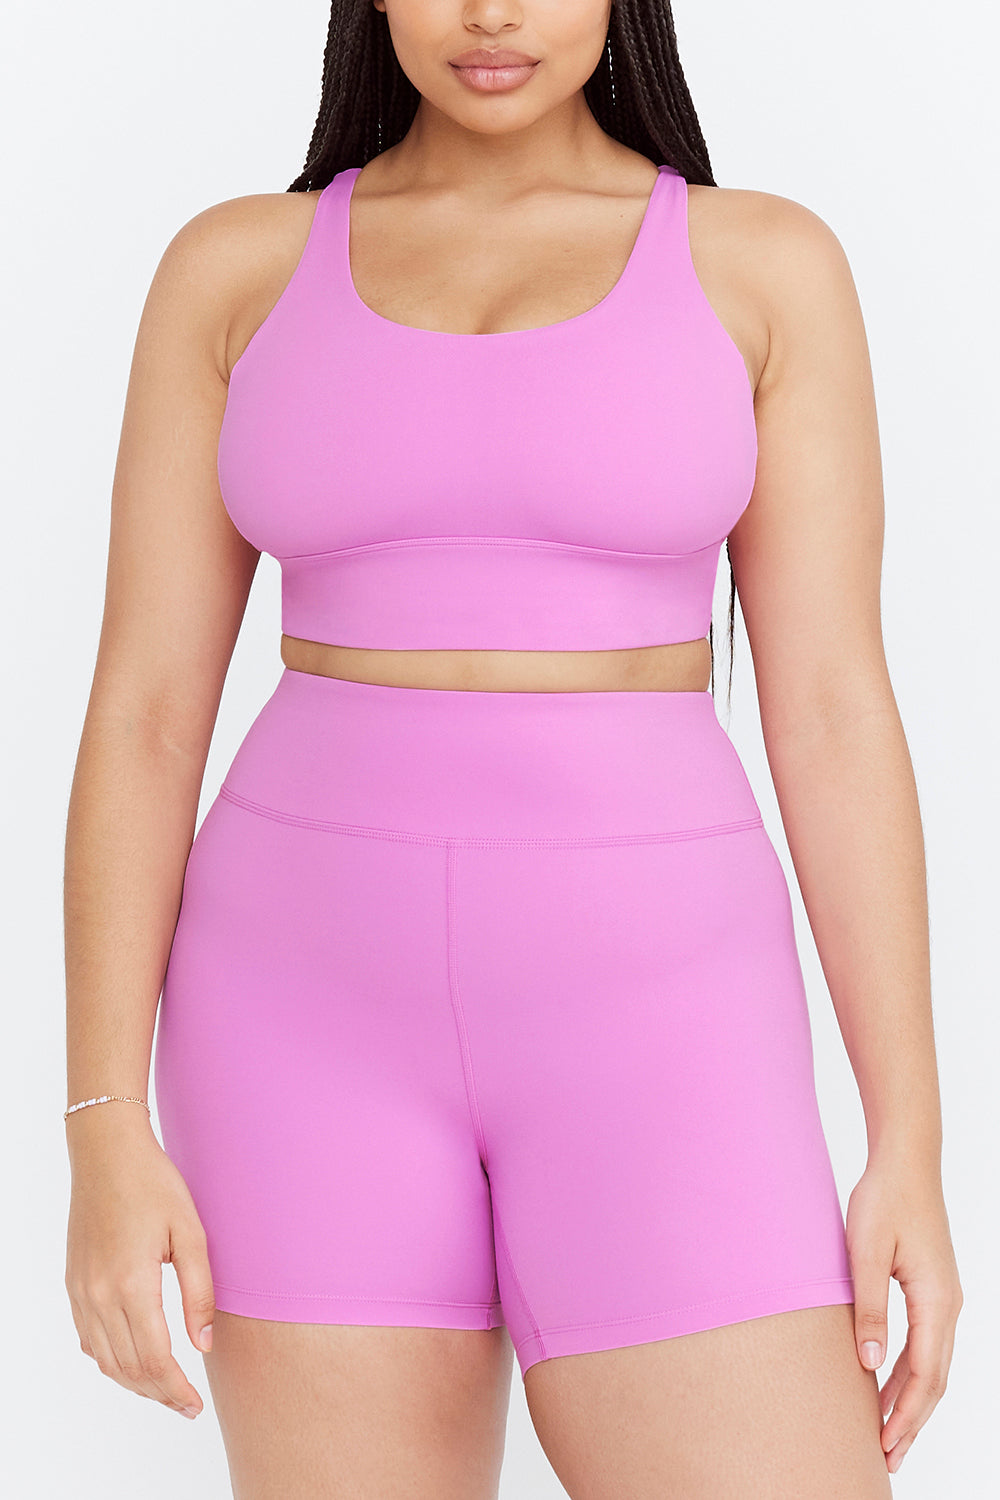 TALA hot pink zip sports bra. Bought from ASOS (now - Depop